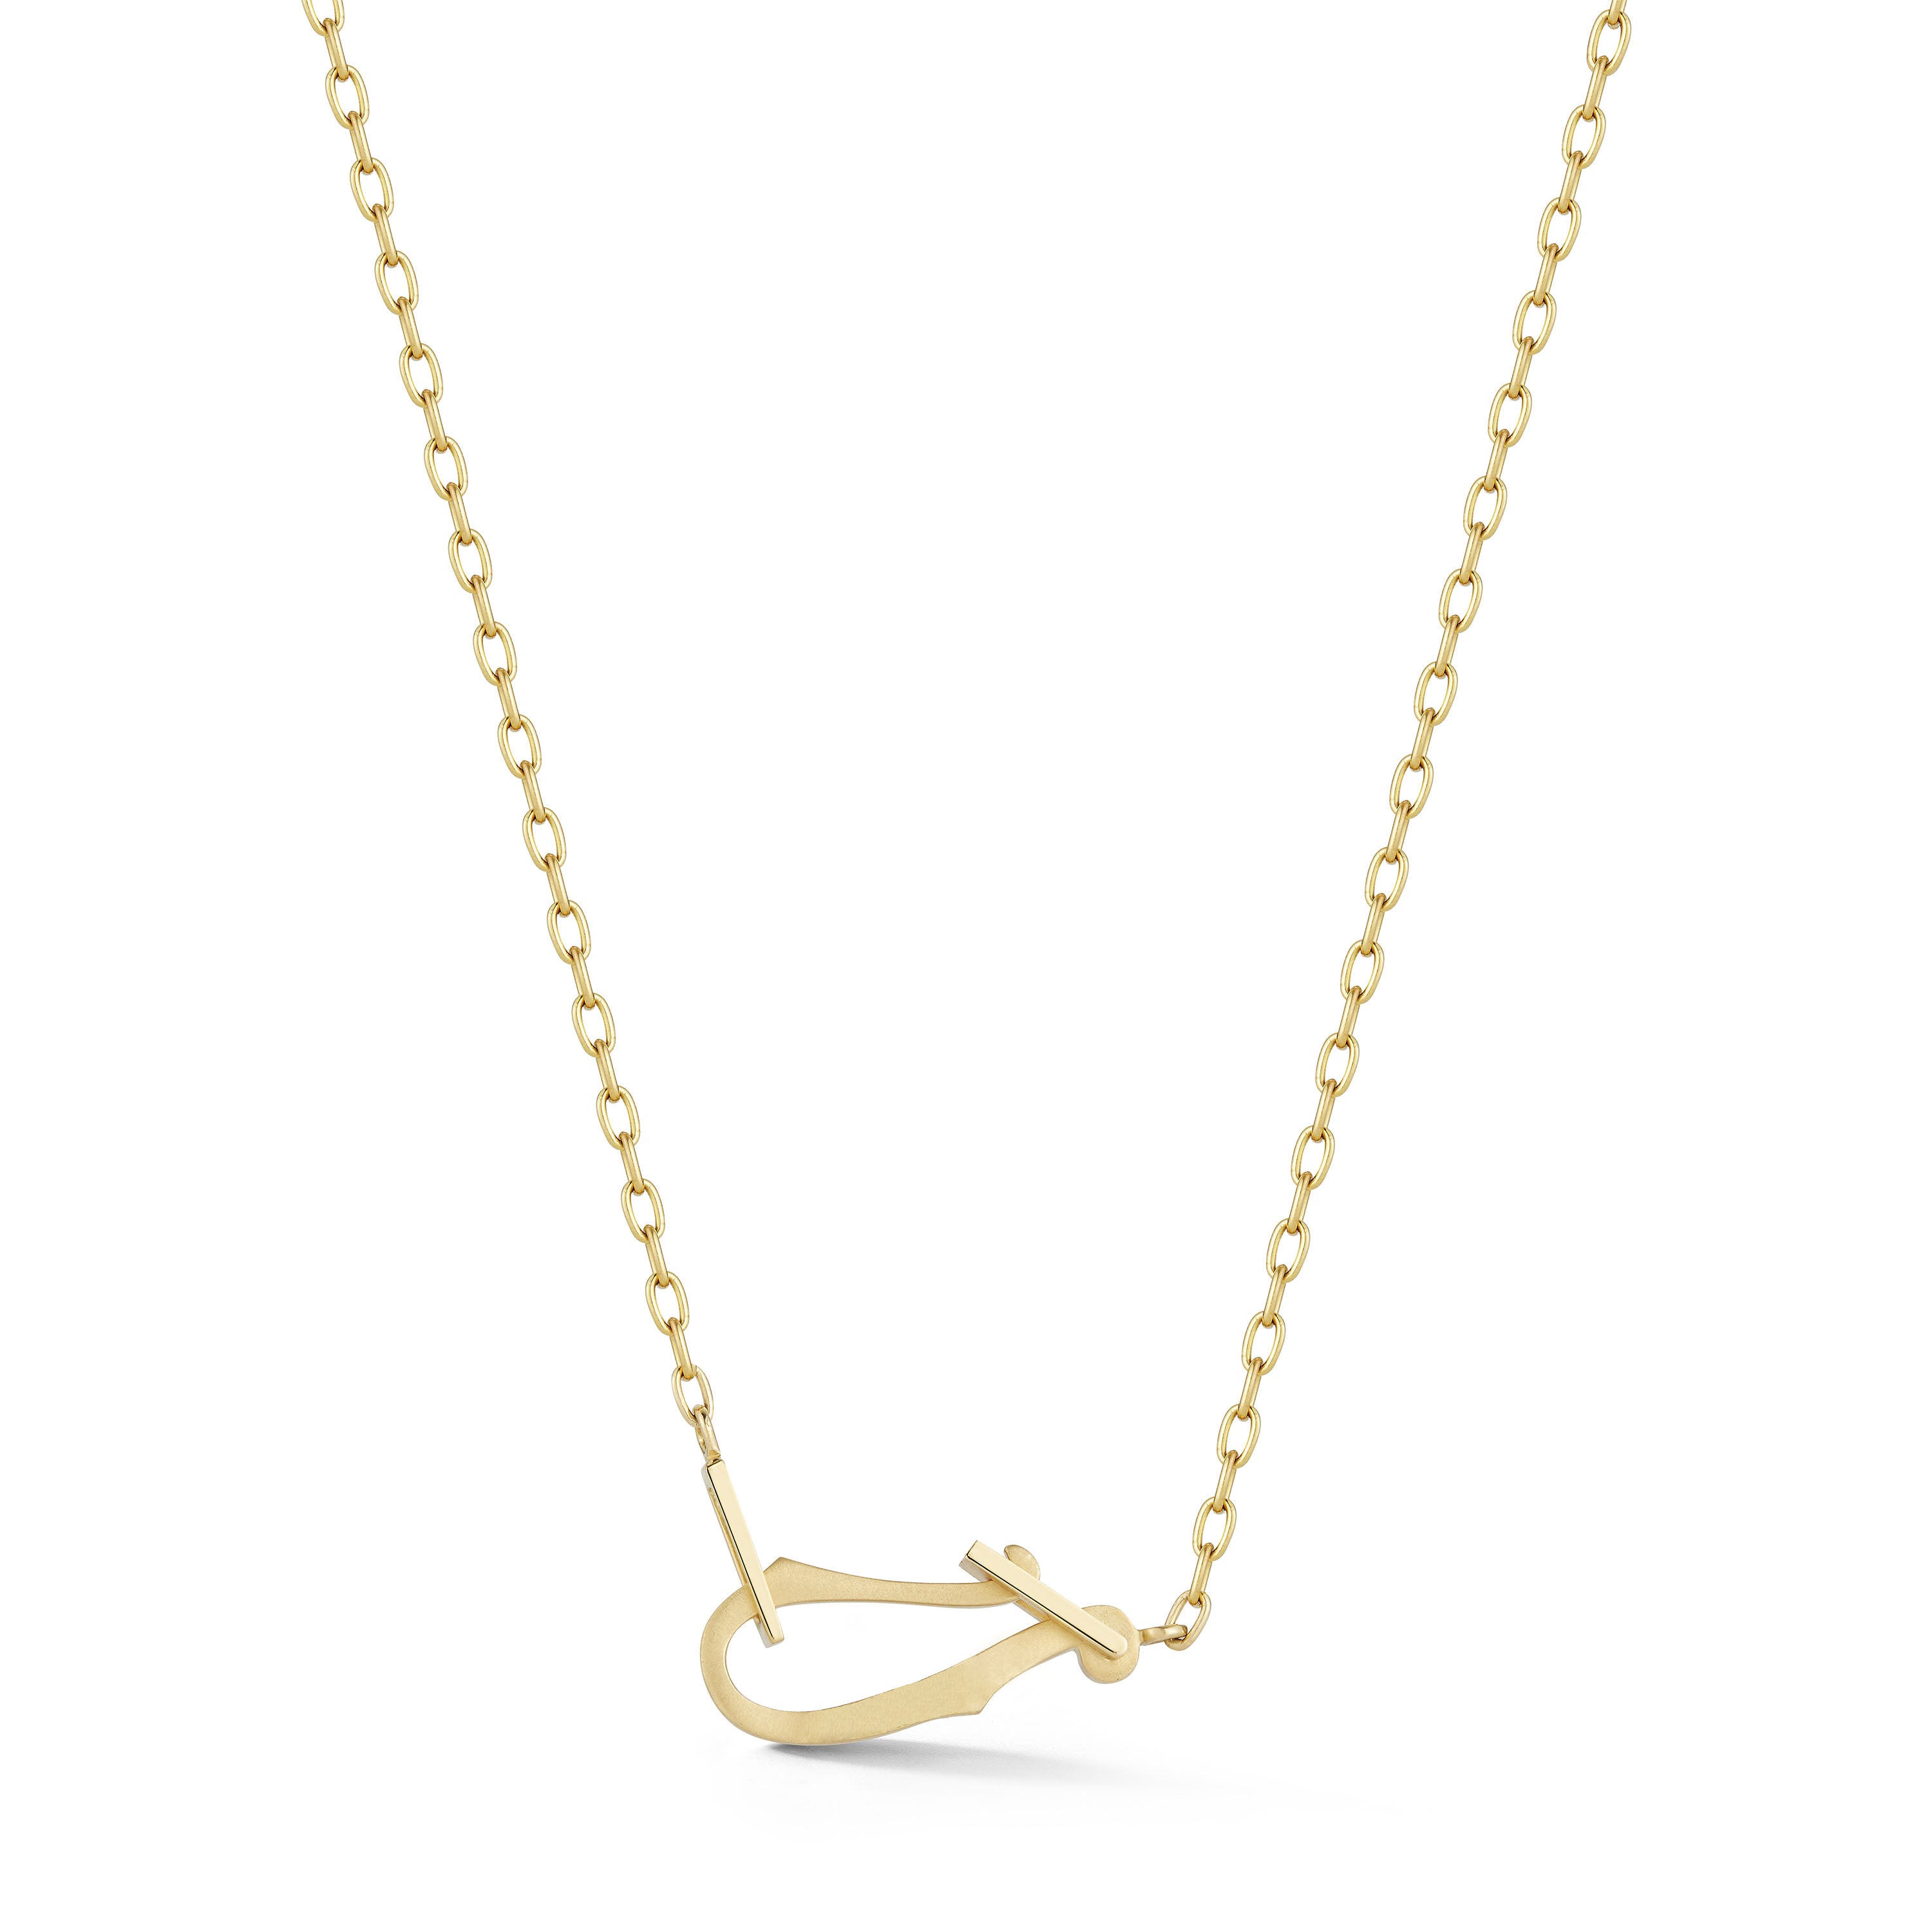 Lola Necklace in 18K Yellow Gold